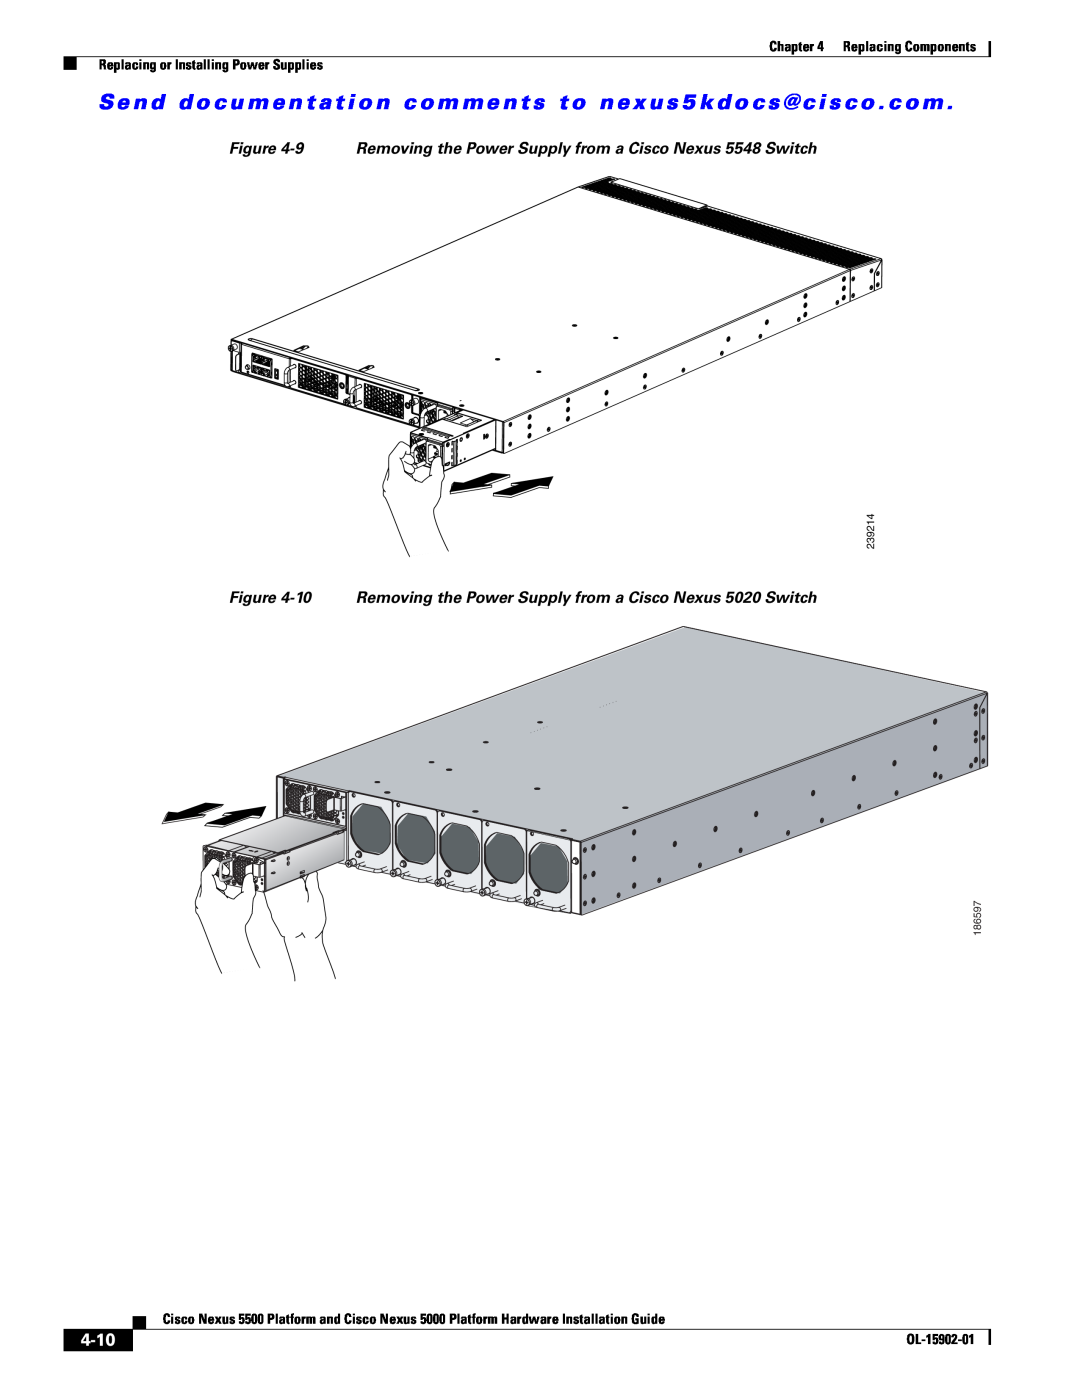 Cisco Systems 5000 manual 4-10, 9 Removing the Power Supply from a Cisco Nexus 5548 Switch, 239214, 186597, OL-15902-01 